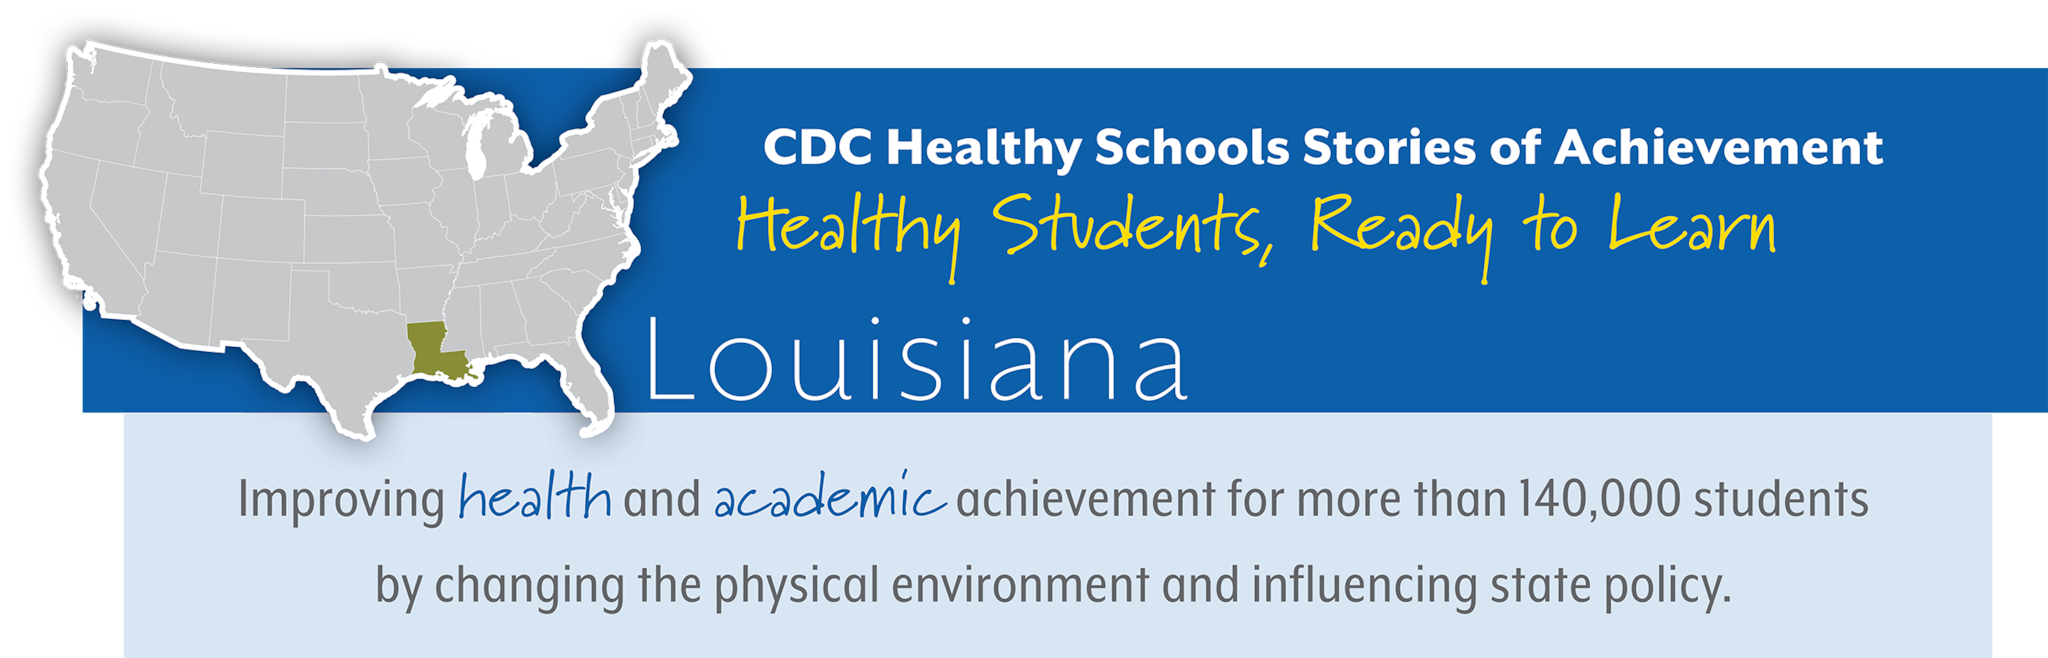 CDC Healthy Schools Stories of Achievement  Healthy Students, Ready to Learn  Louisiana Improving health and academic achievement for more than 140,000 students  by changing the physical environment and influencing state policy. 